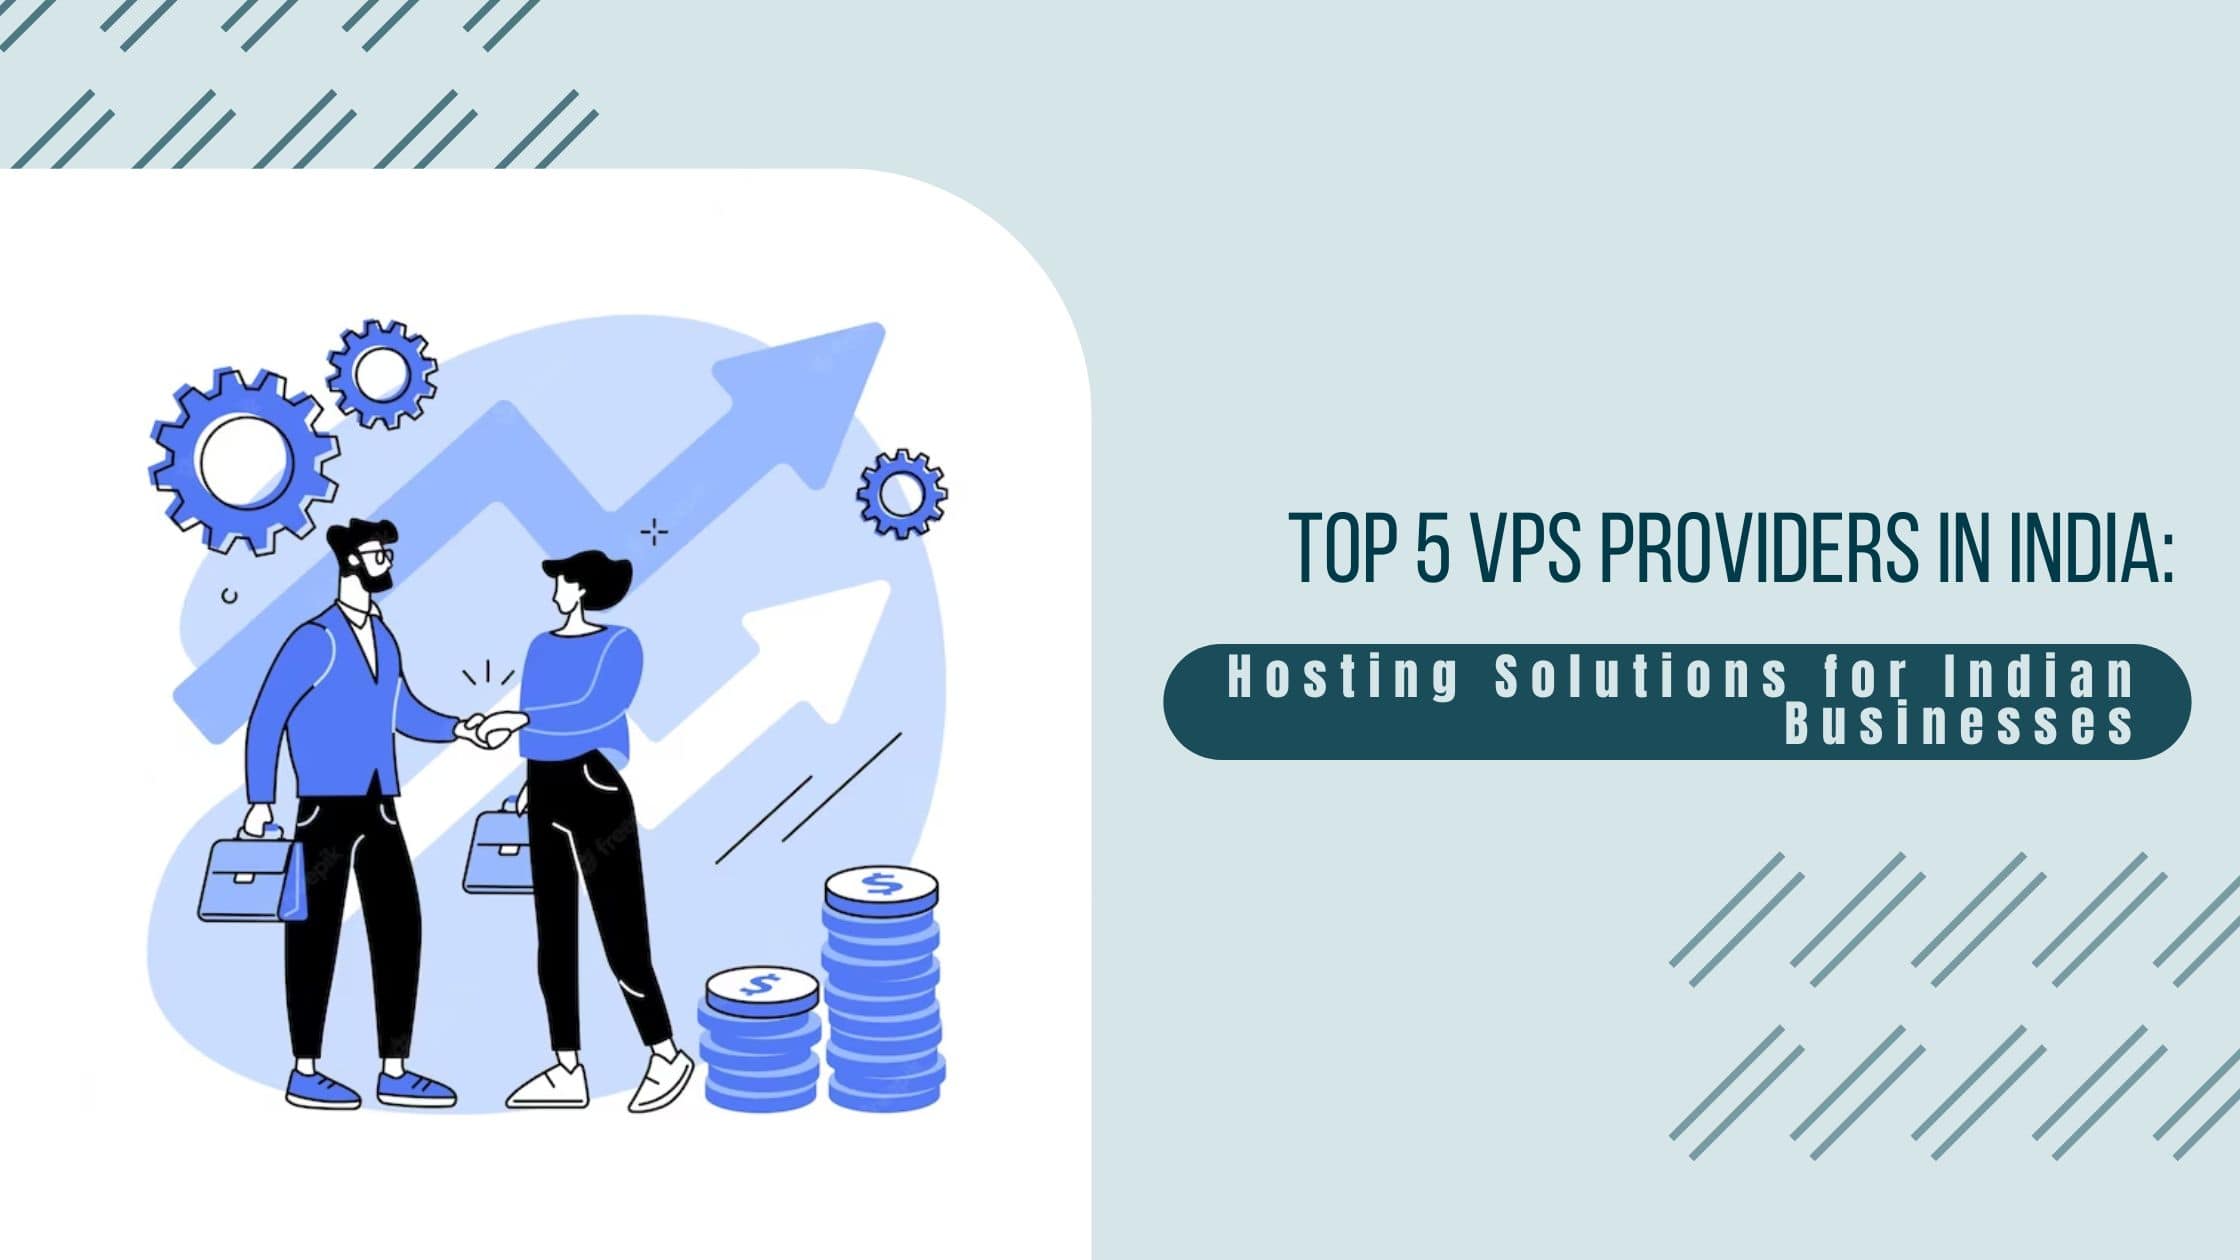 Top 5 VPS Providers in India Hosting Solutions for Indian Businesses